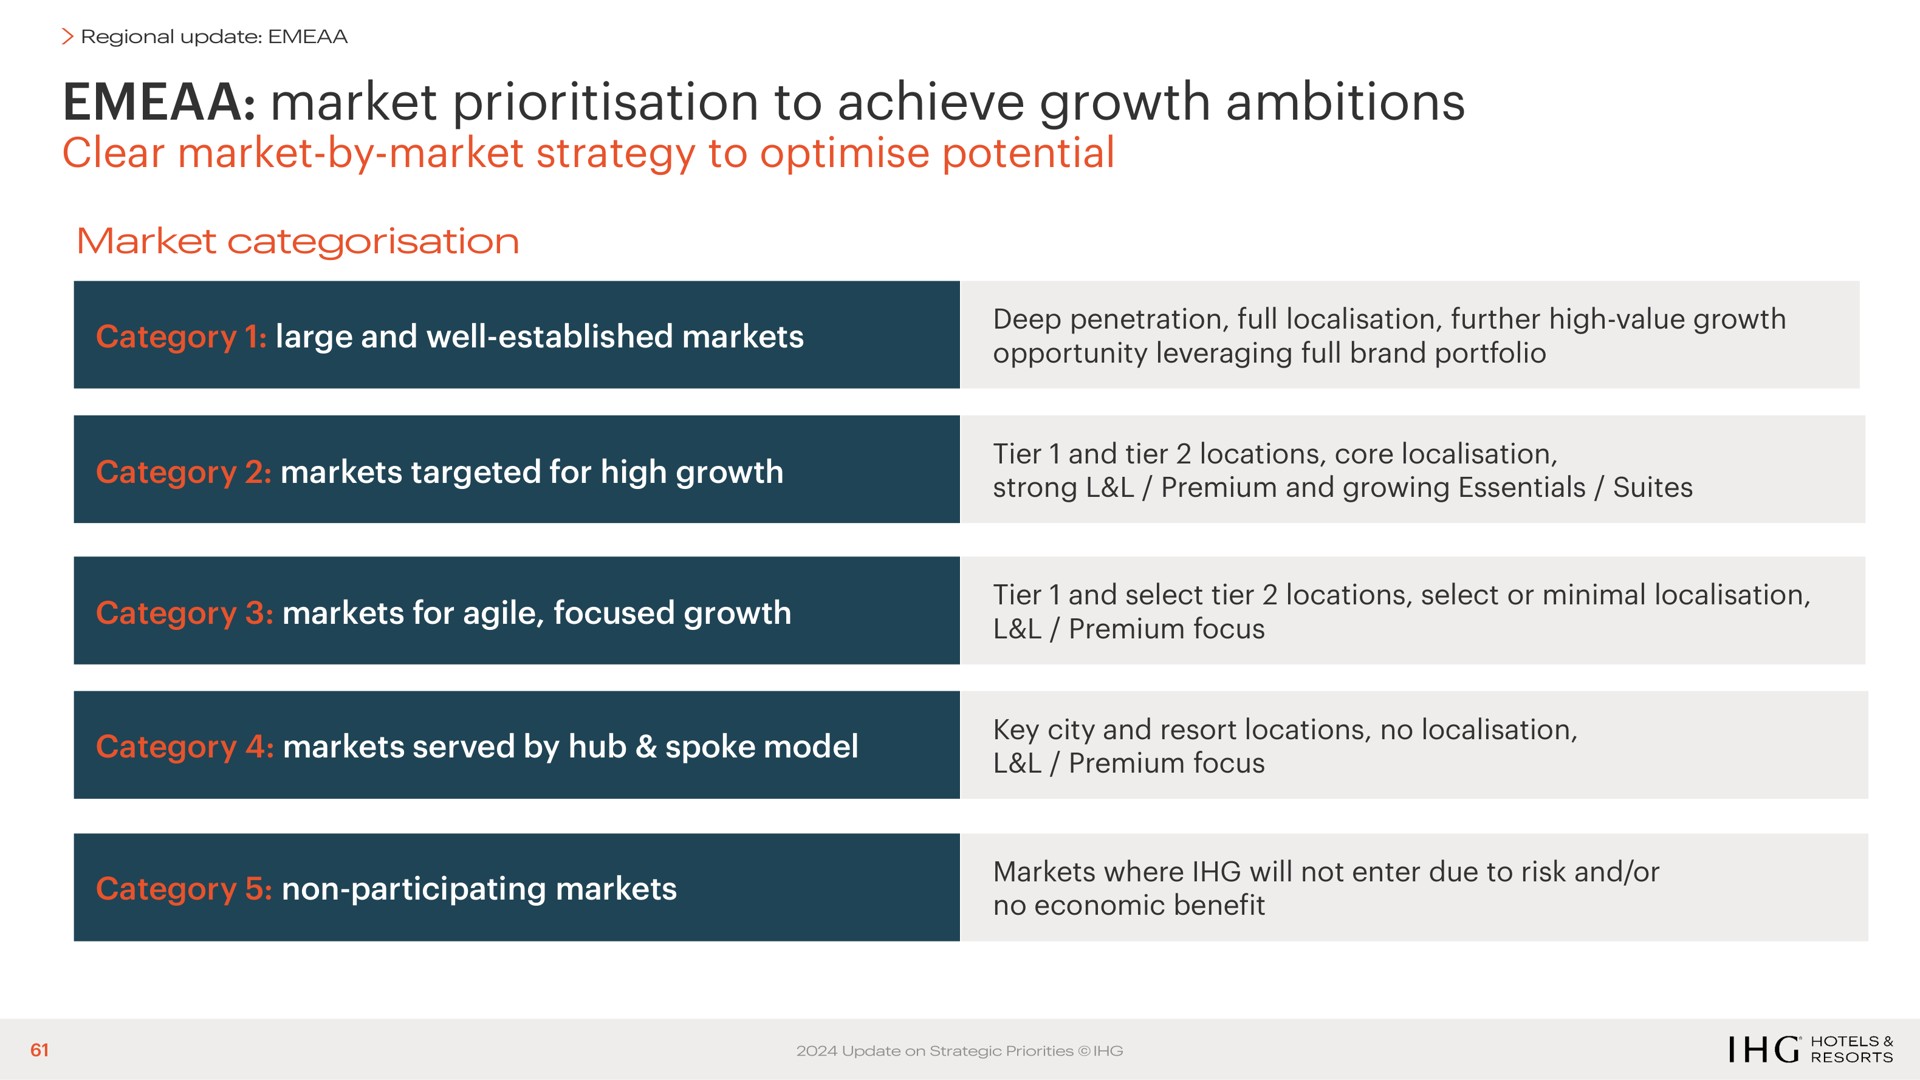 market to achieve growth ambitions clear market by market strategy to potential | IHG Hotels